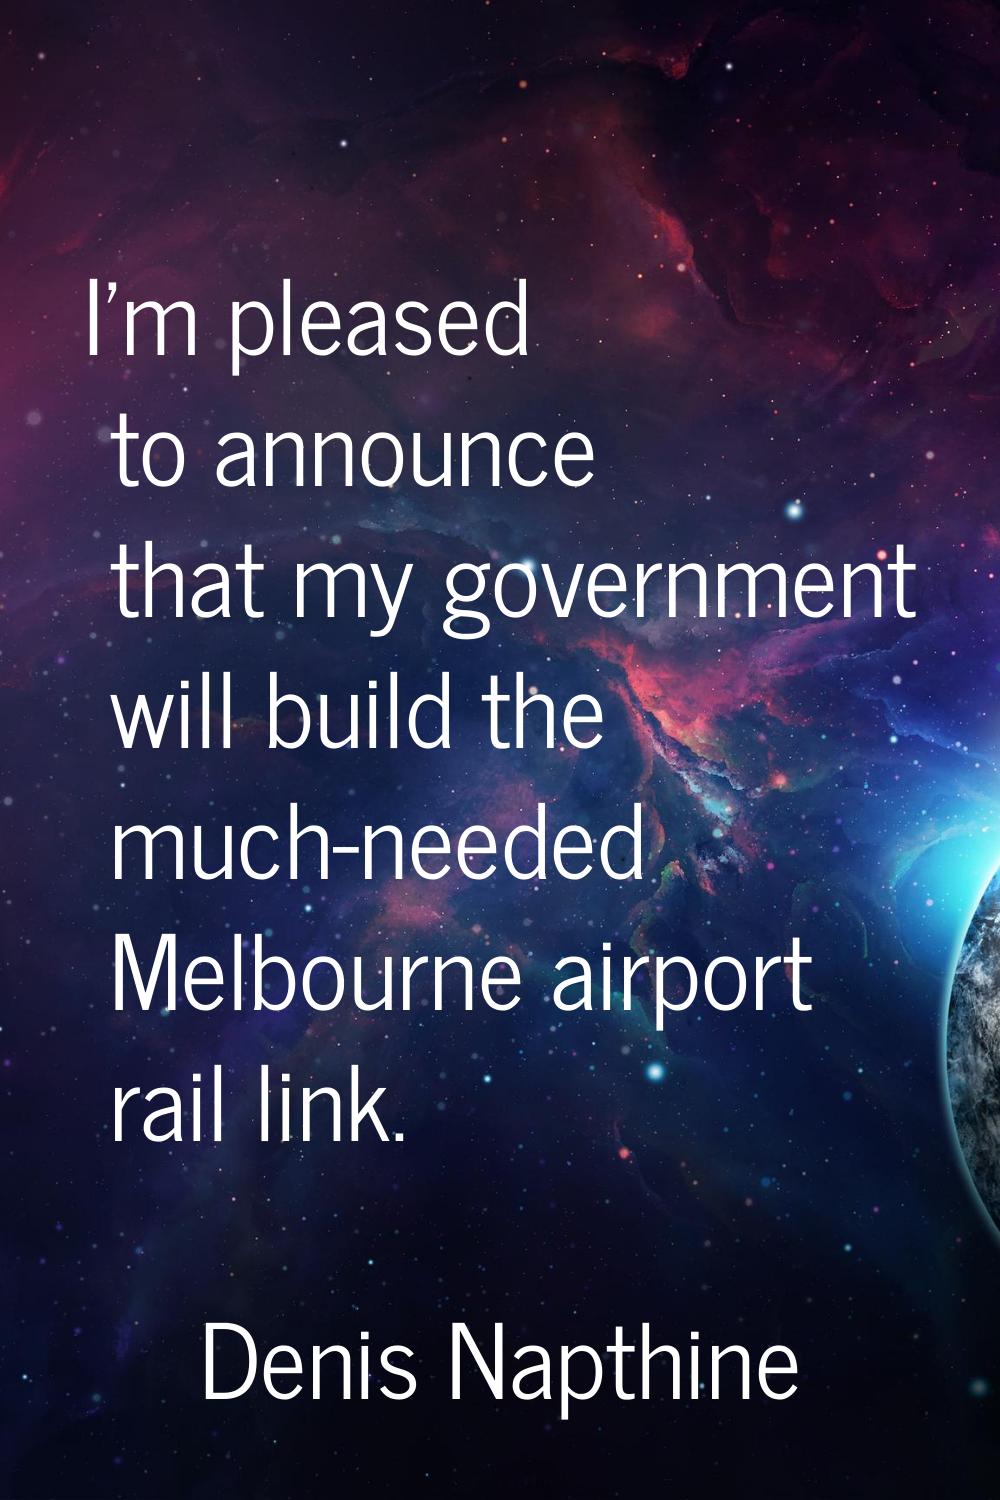 I'm pleased to announce that my government will build the much-needed Melbourne airport rail link.